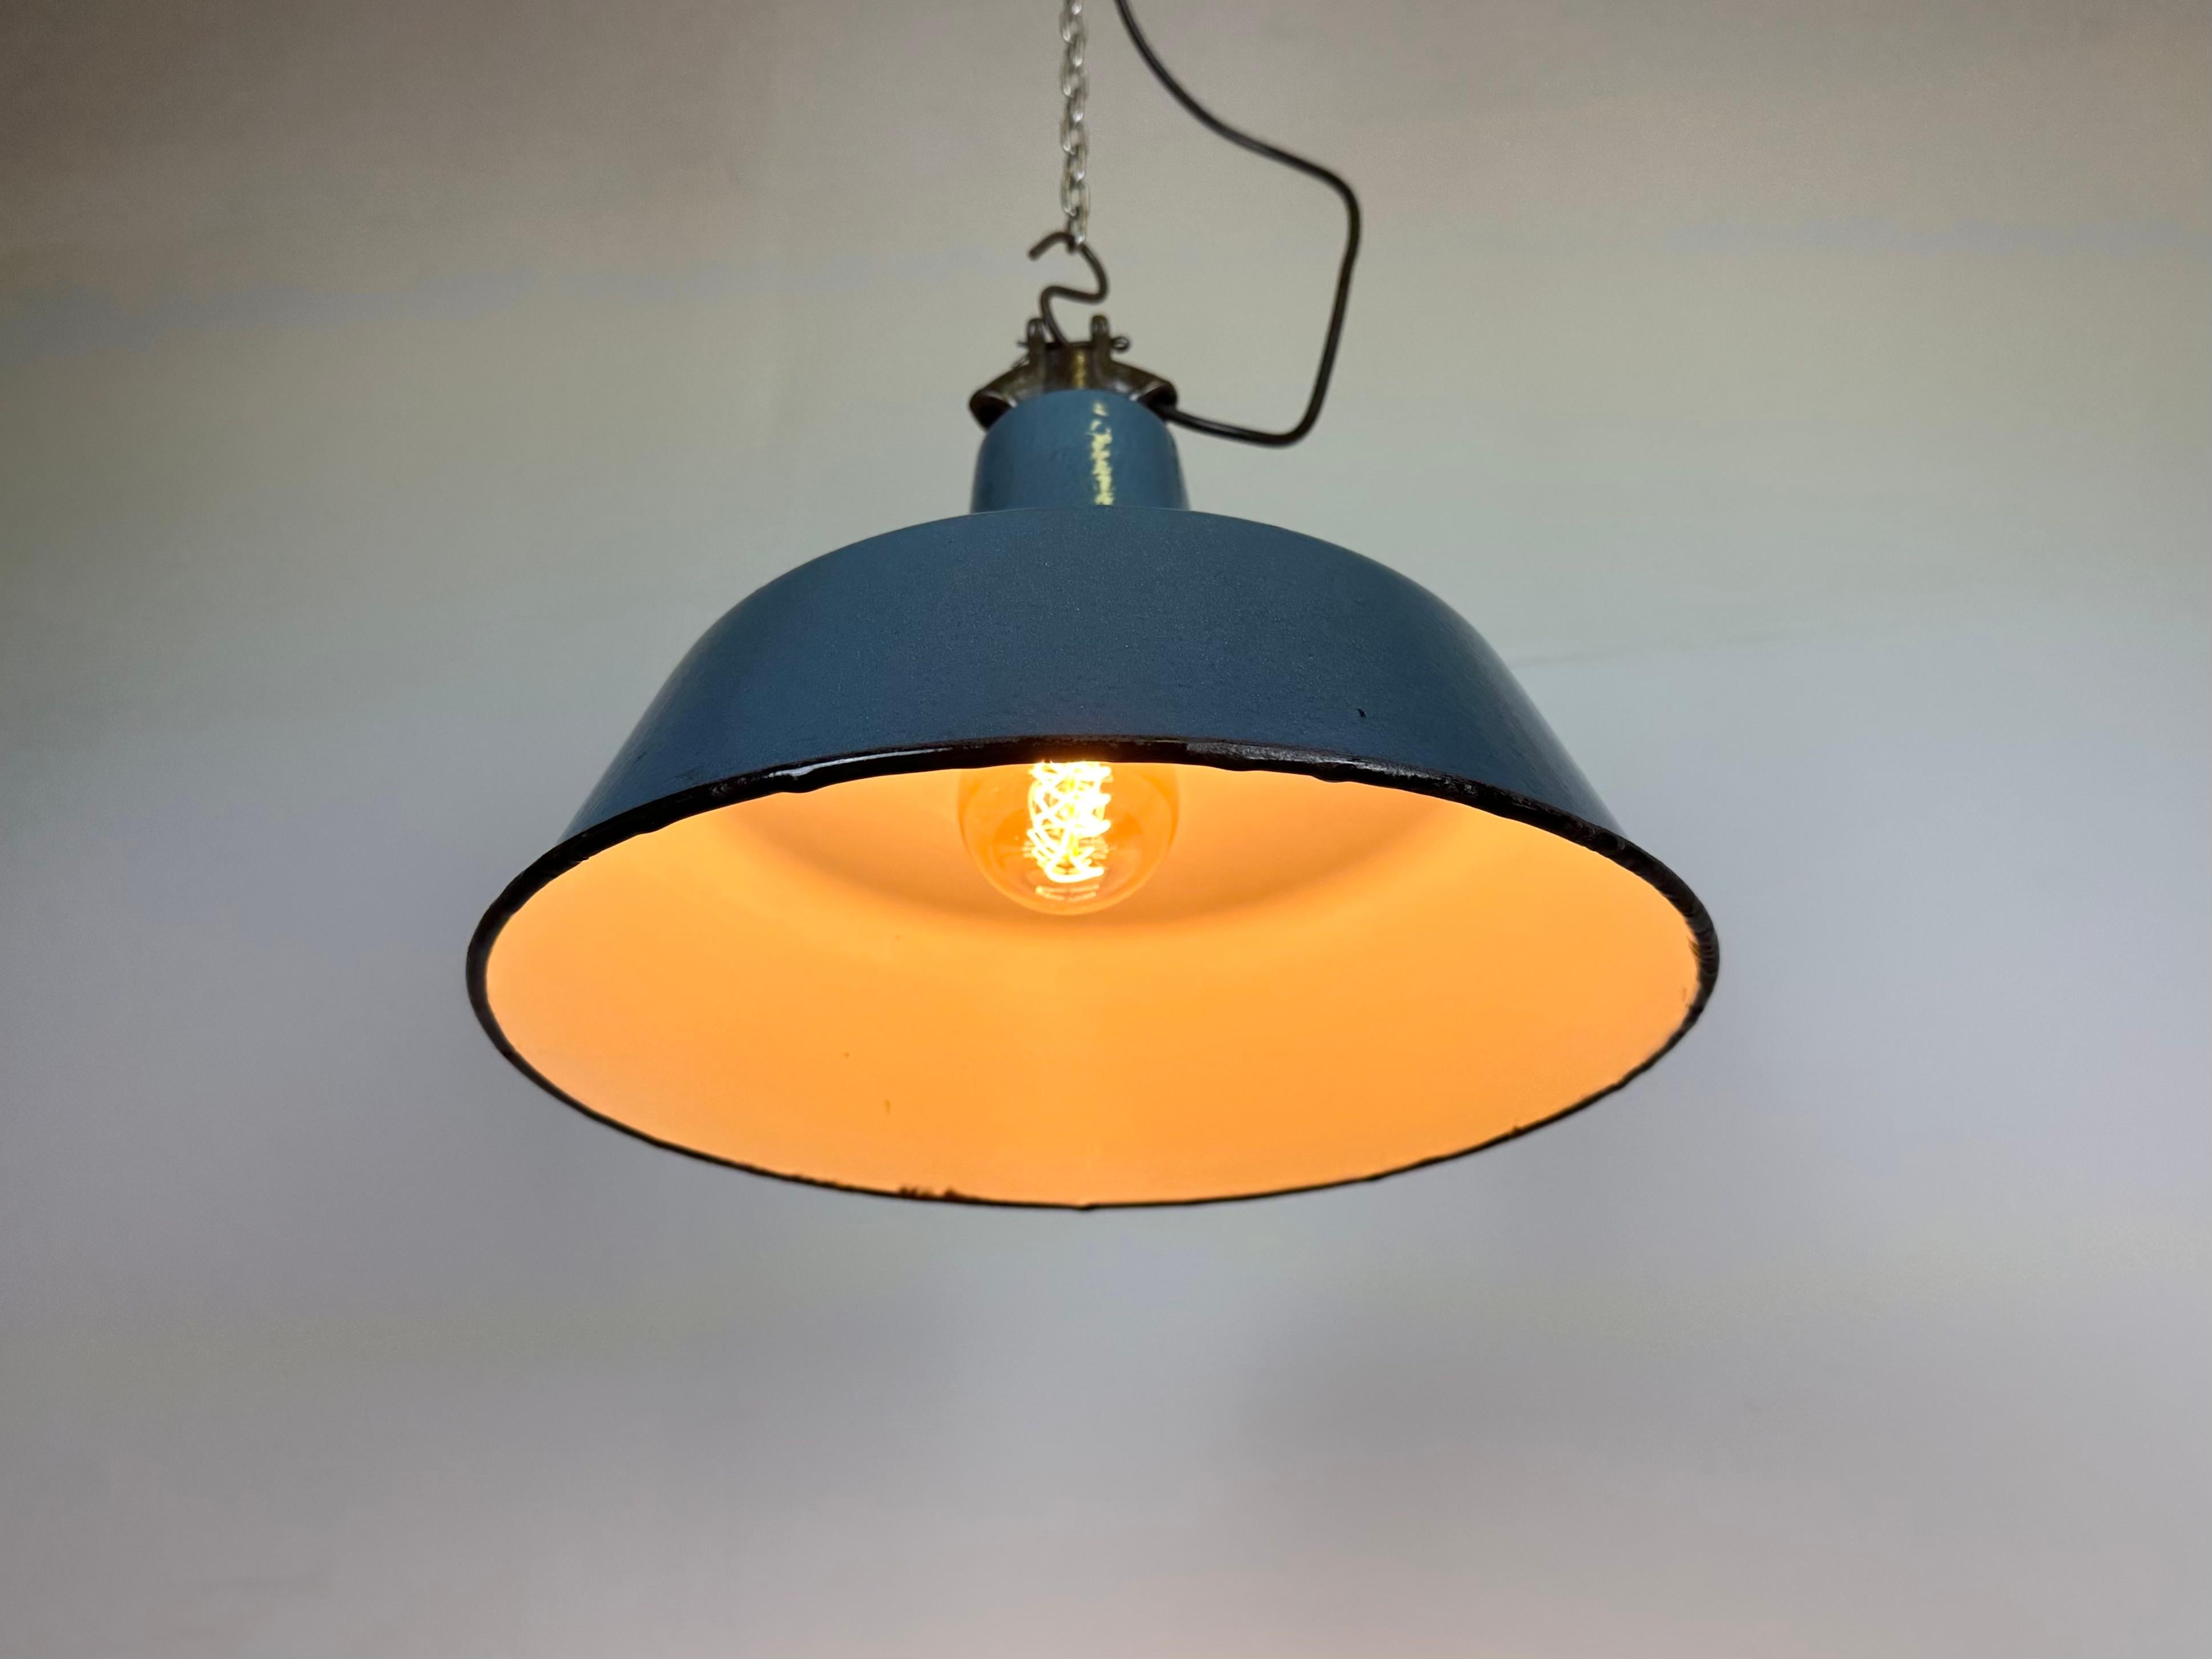 Industrial Blue Enamel Factory Lamp with Cast Iron Top, 1960s For Sale 2